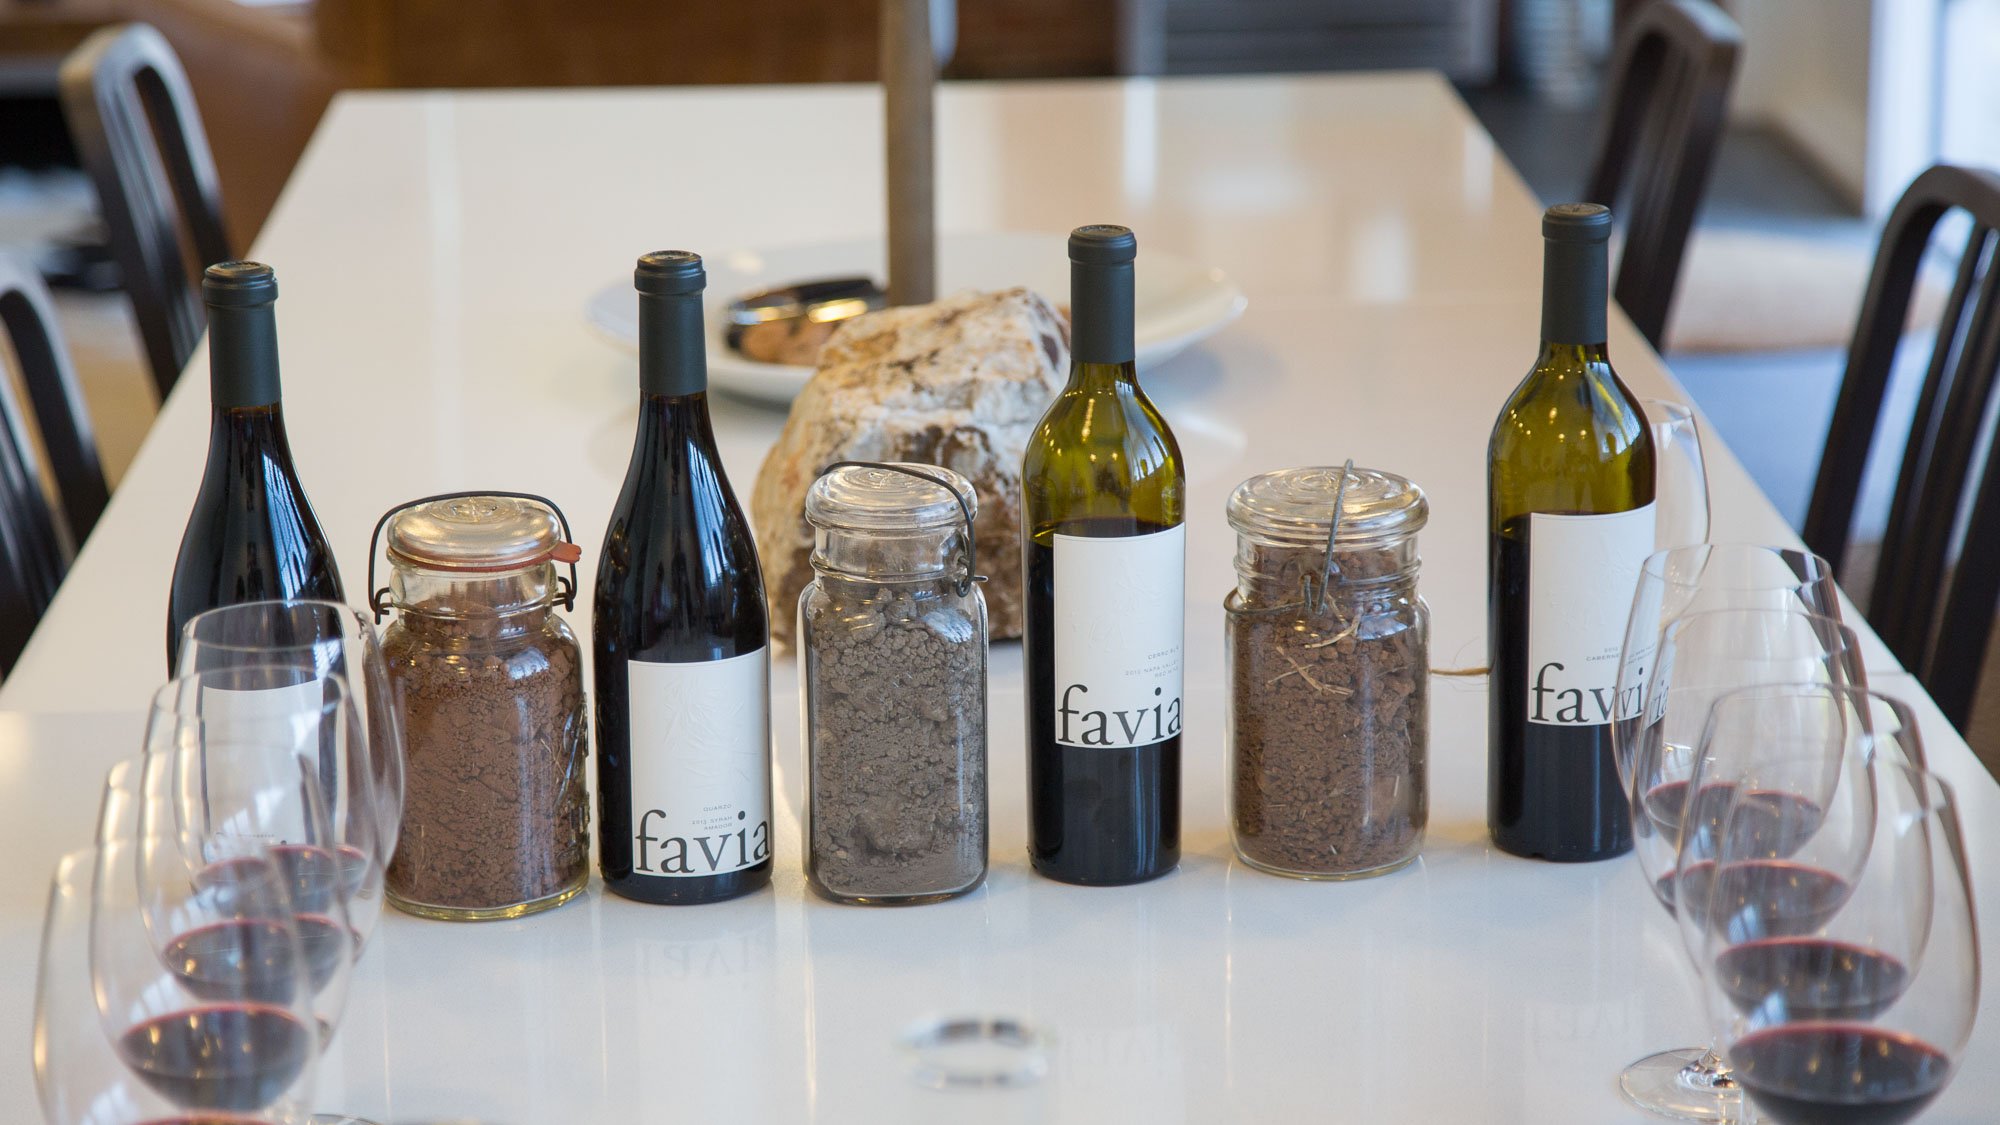 The wines and soils